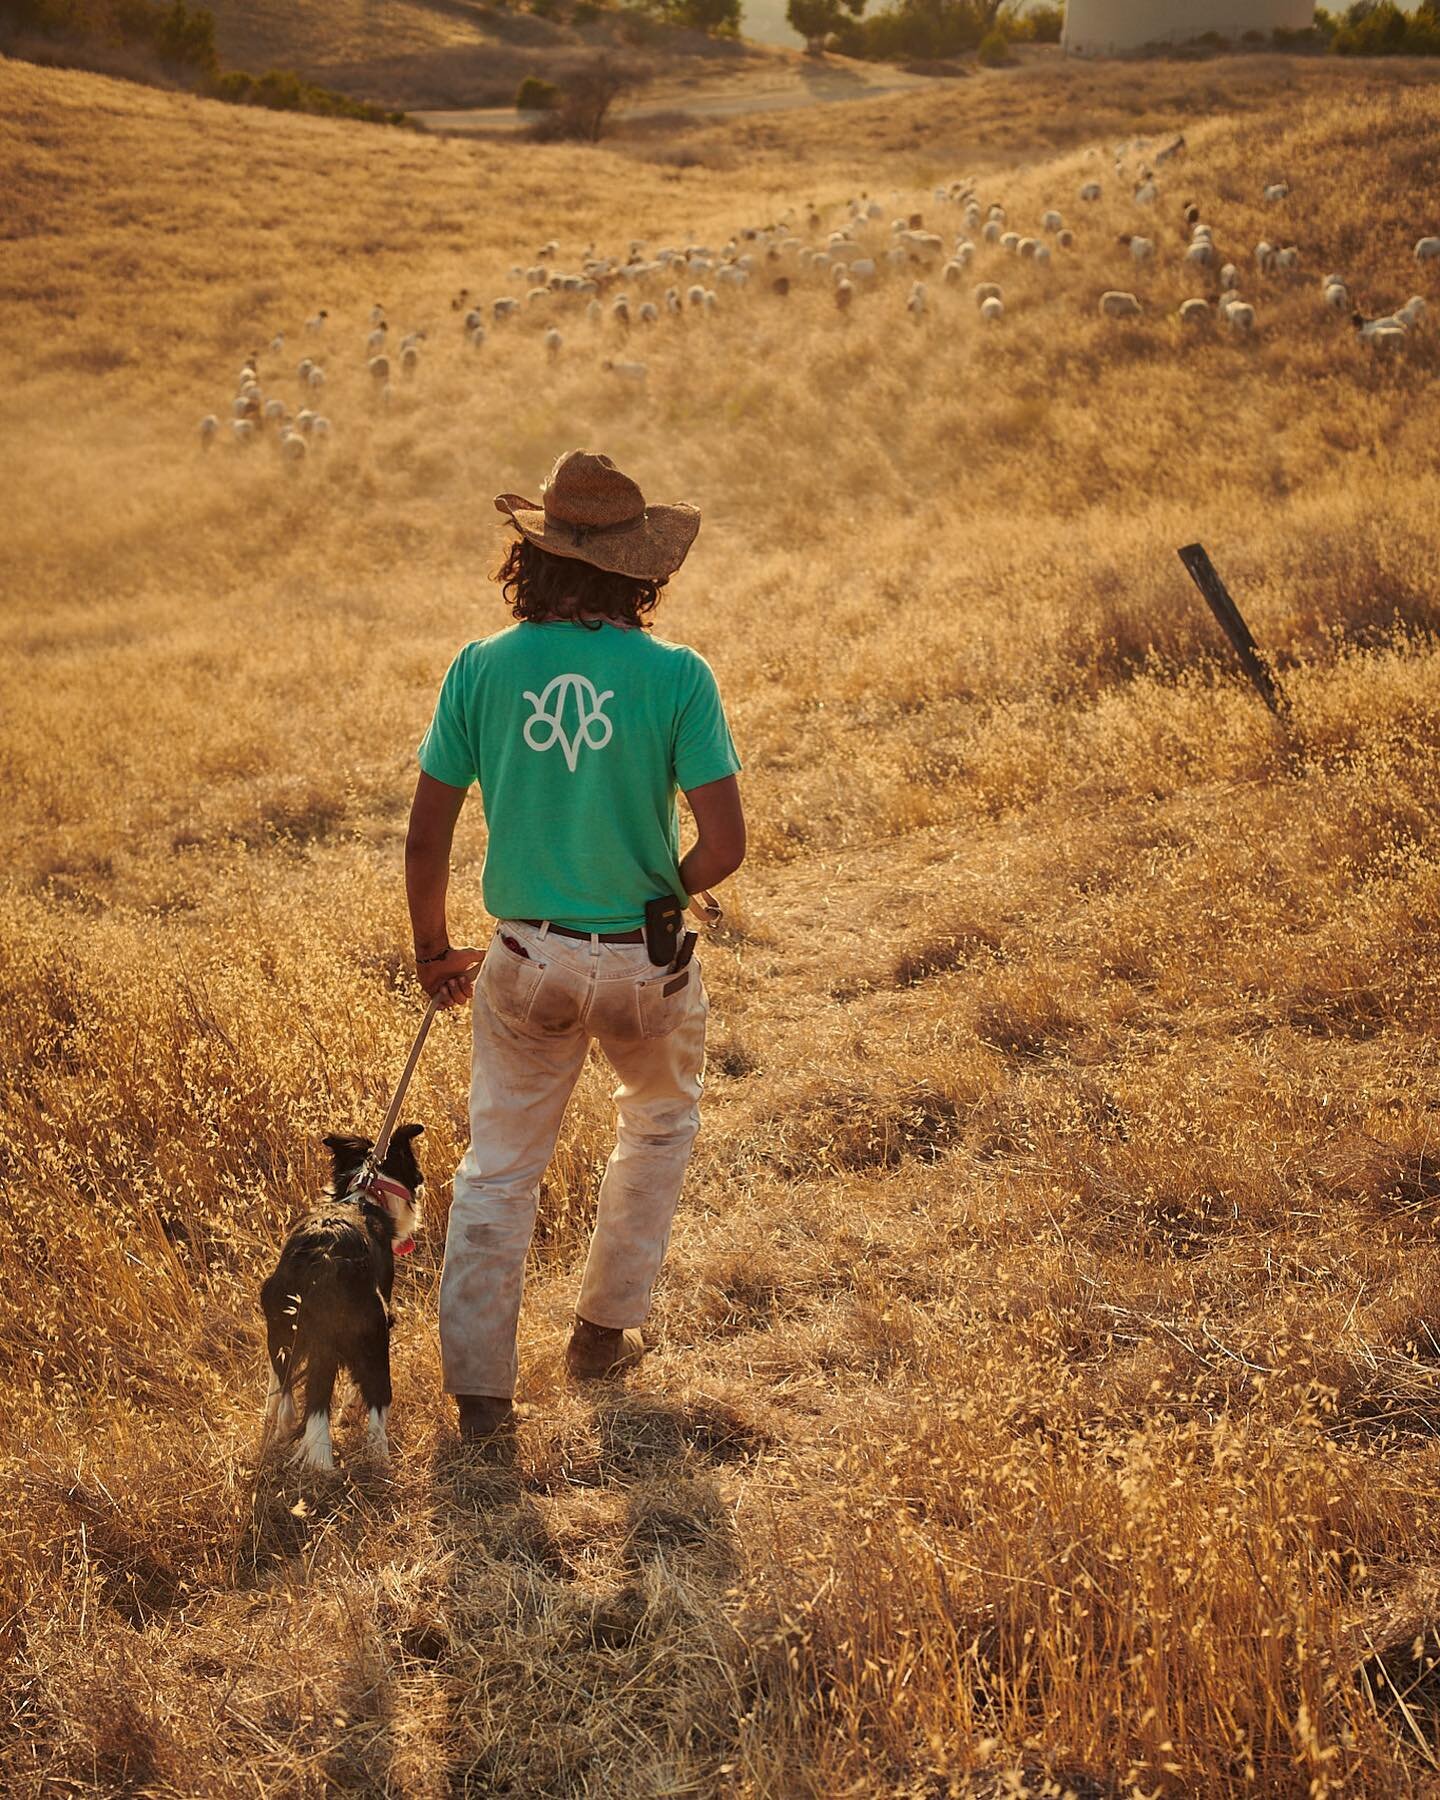 Thank you @jungmaven for sharing what we do and love and for outfitting us in well made wears  in organic hemp and cotton with on-point colors.

The shepherds wear it well.

📷 @paulnemirahcollins who captured us all so well

#thenewpastoralists #jun